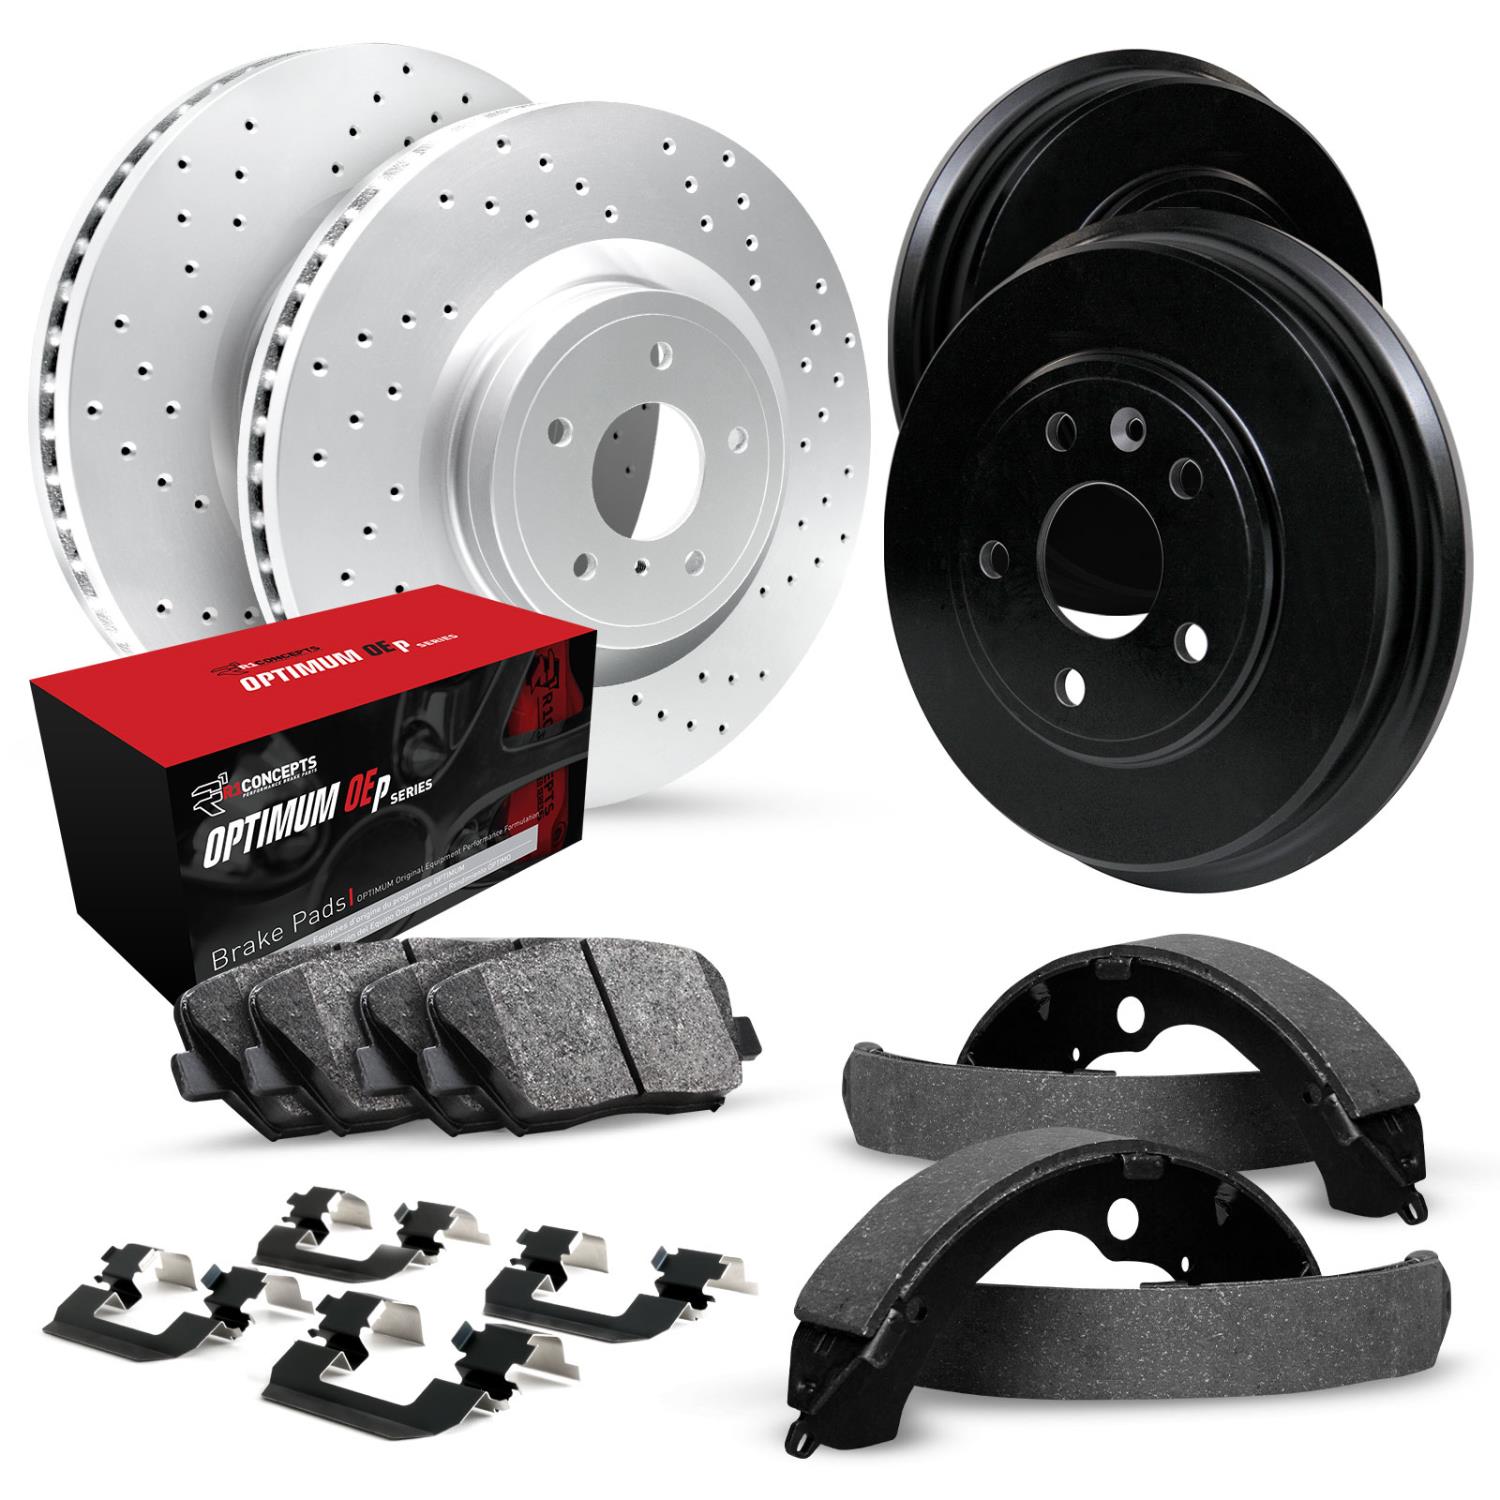 GEO-Carbon Drilled Brake Rotor & Drum Set w/Optimum OE Pads, Shoes, & Hardware, 1973-1975 GM, Position: Front & Rear